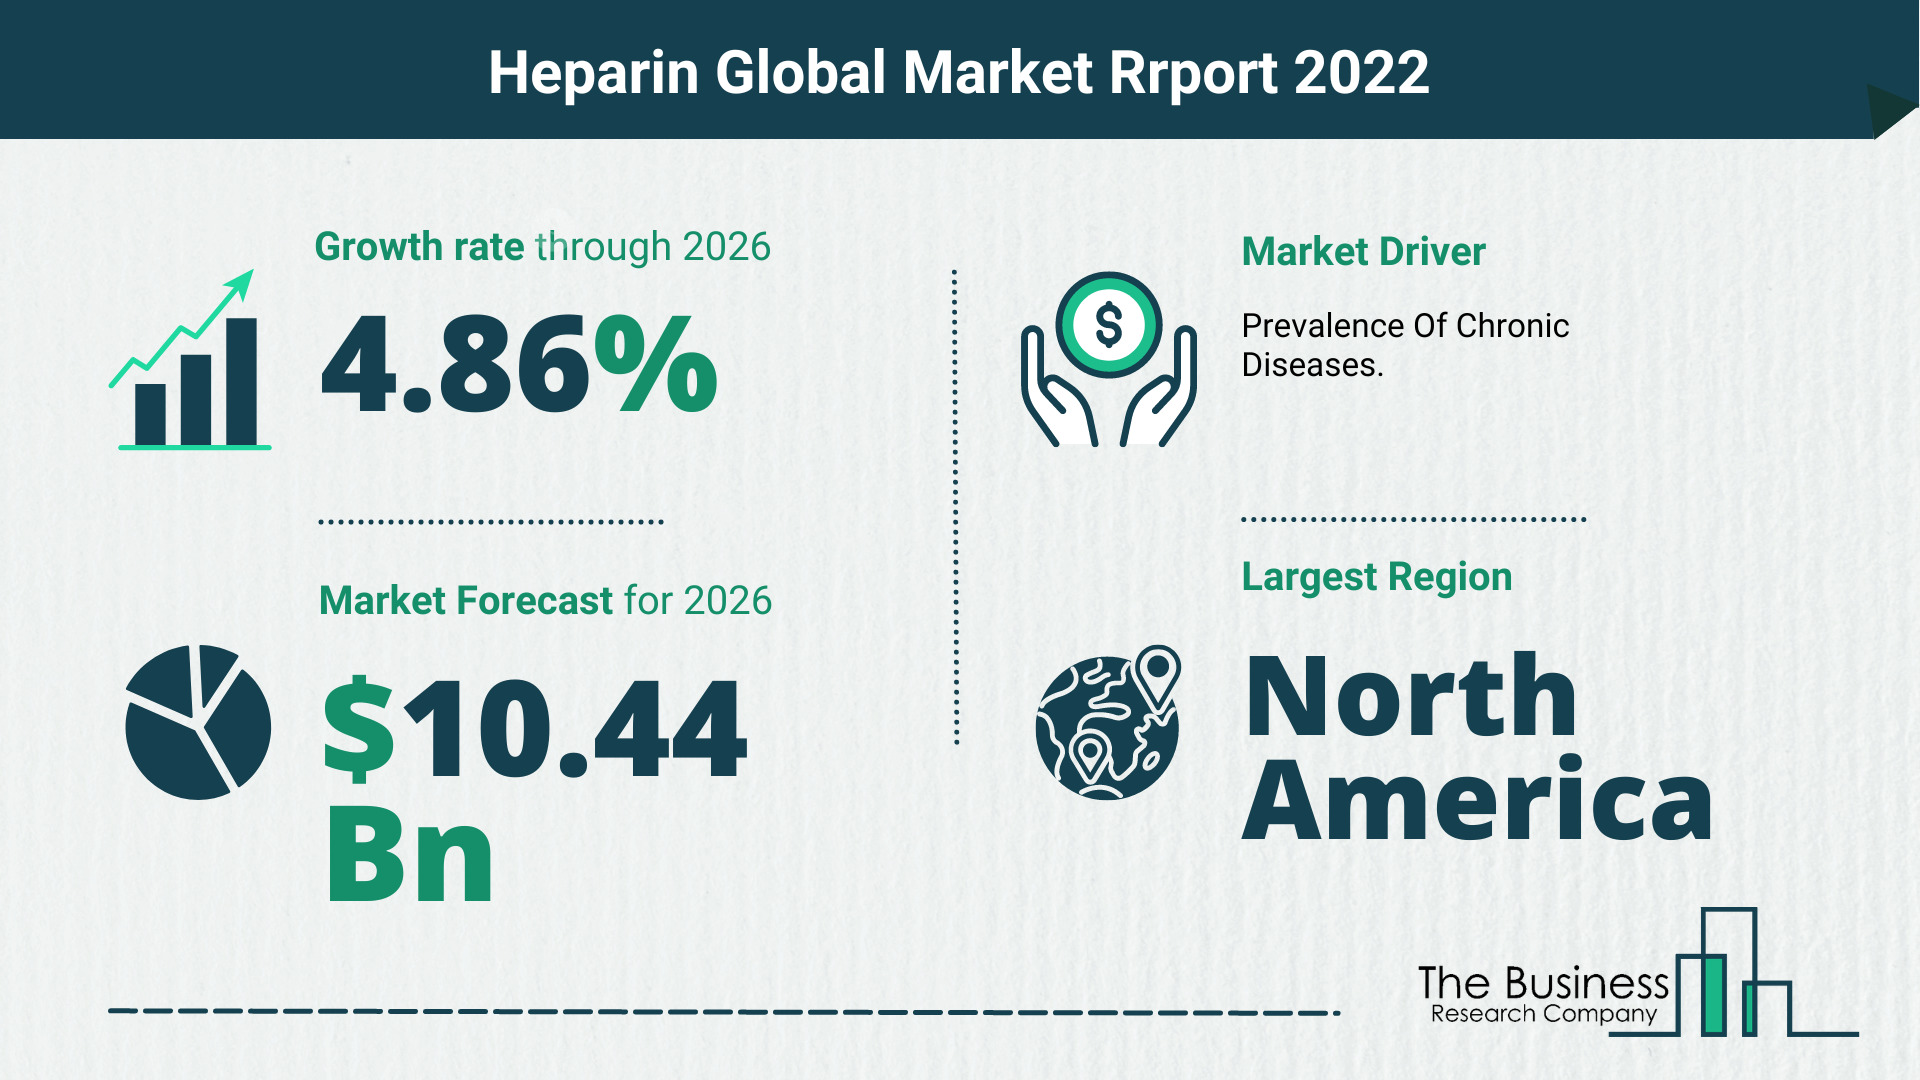 The Heparin Market Share, Market Size, And Growth Rate 2022